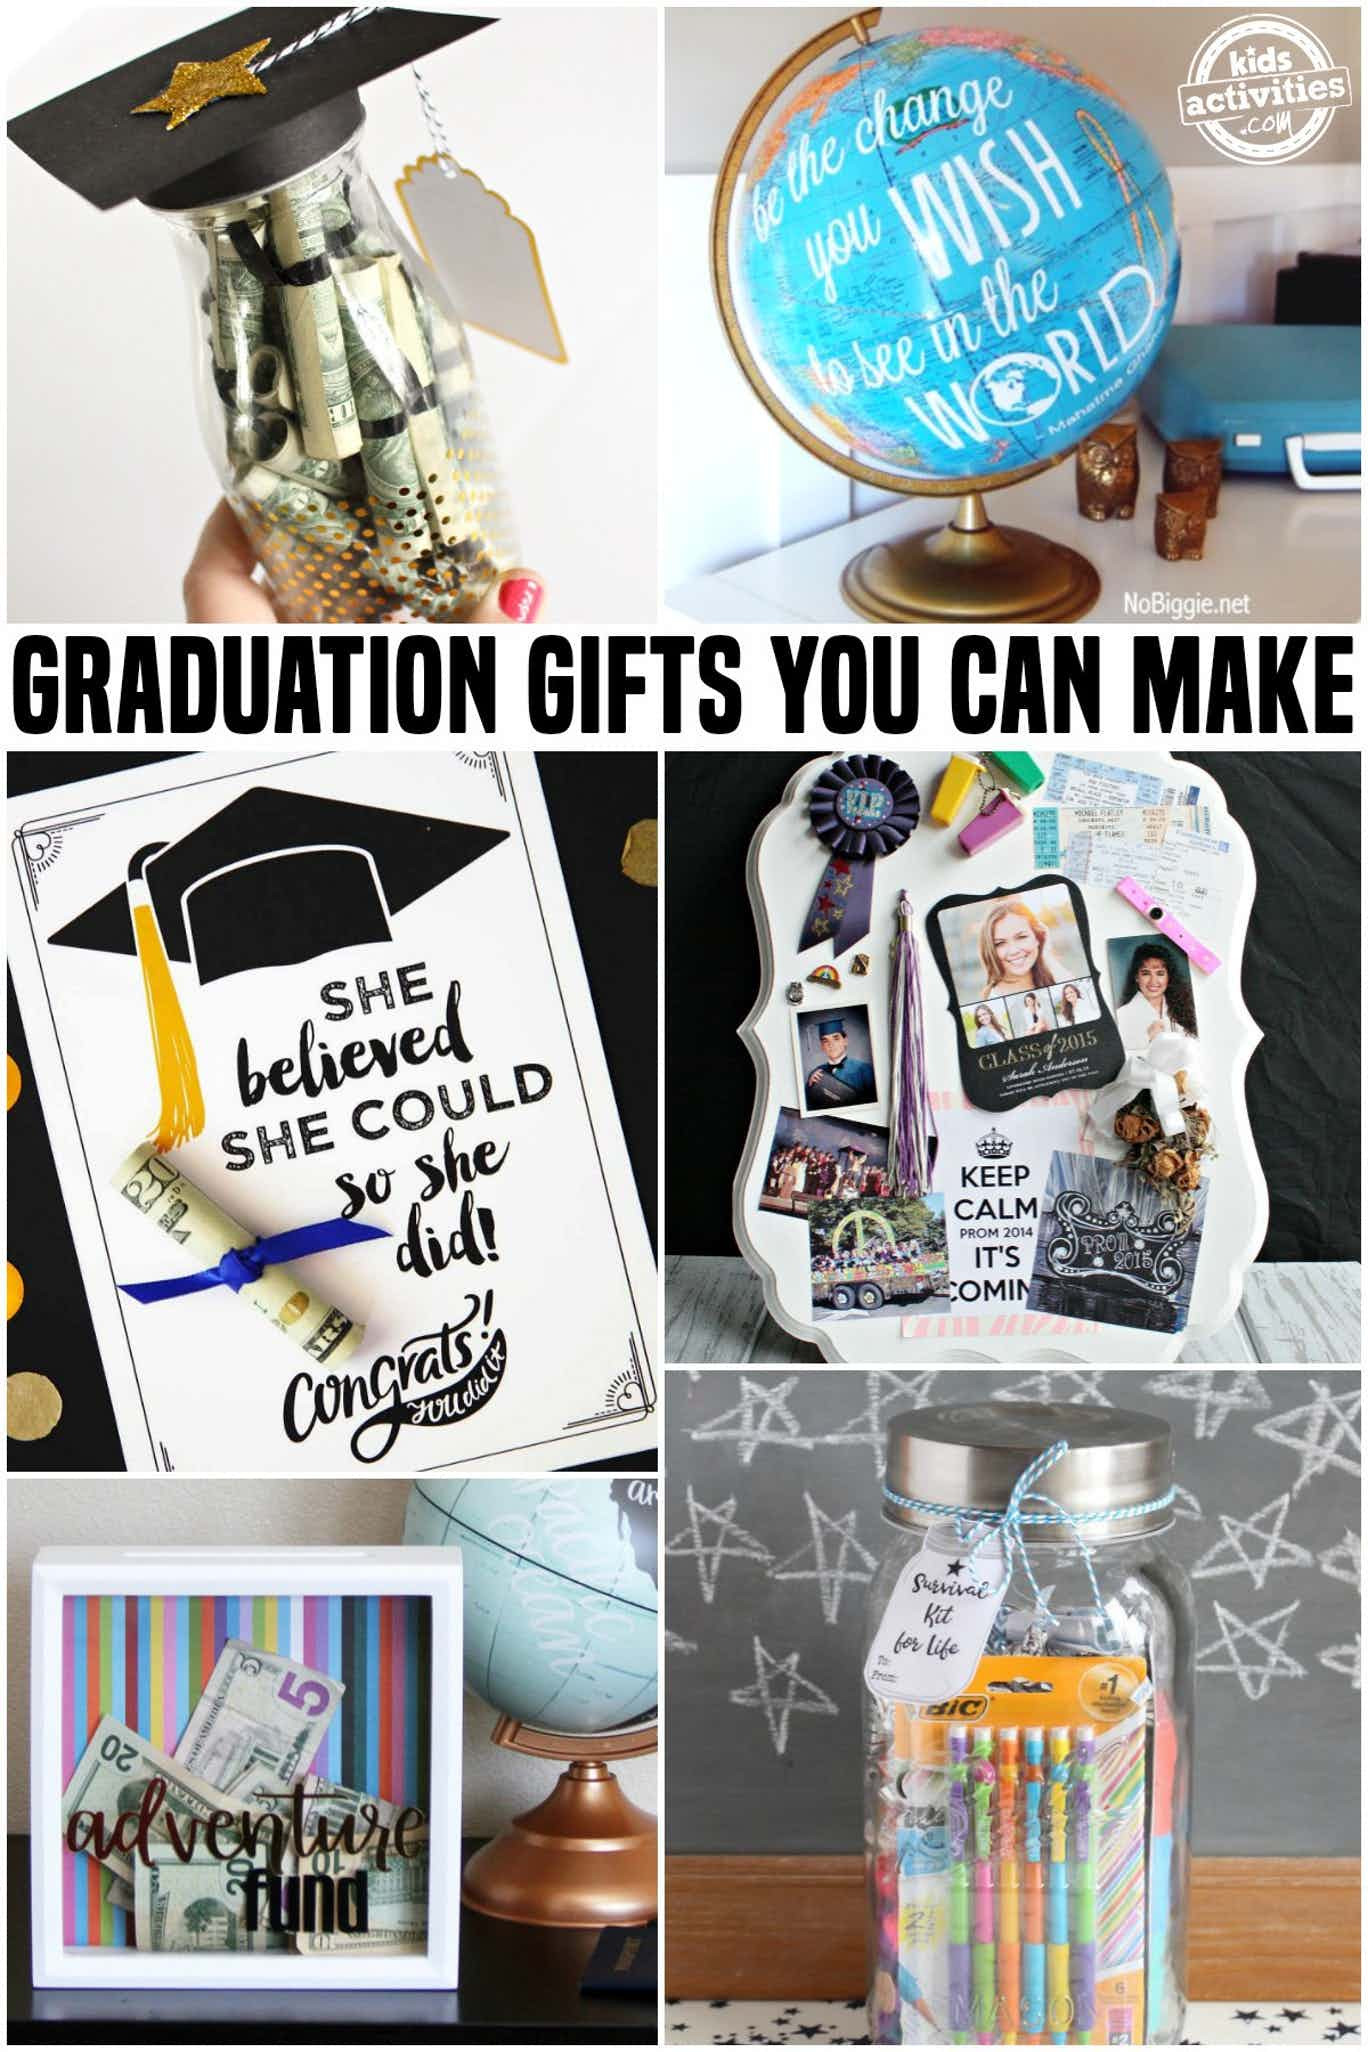 Elementary Graduation Gift Ideas
 Awesome Graduation Gifts You Can Make At Home